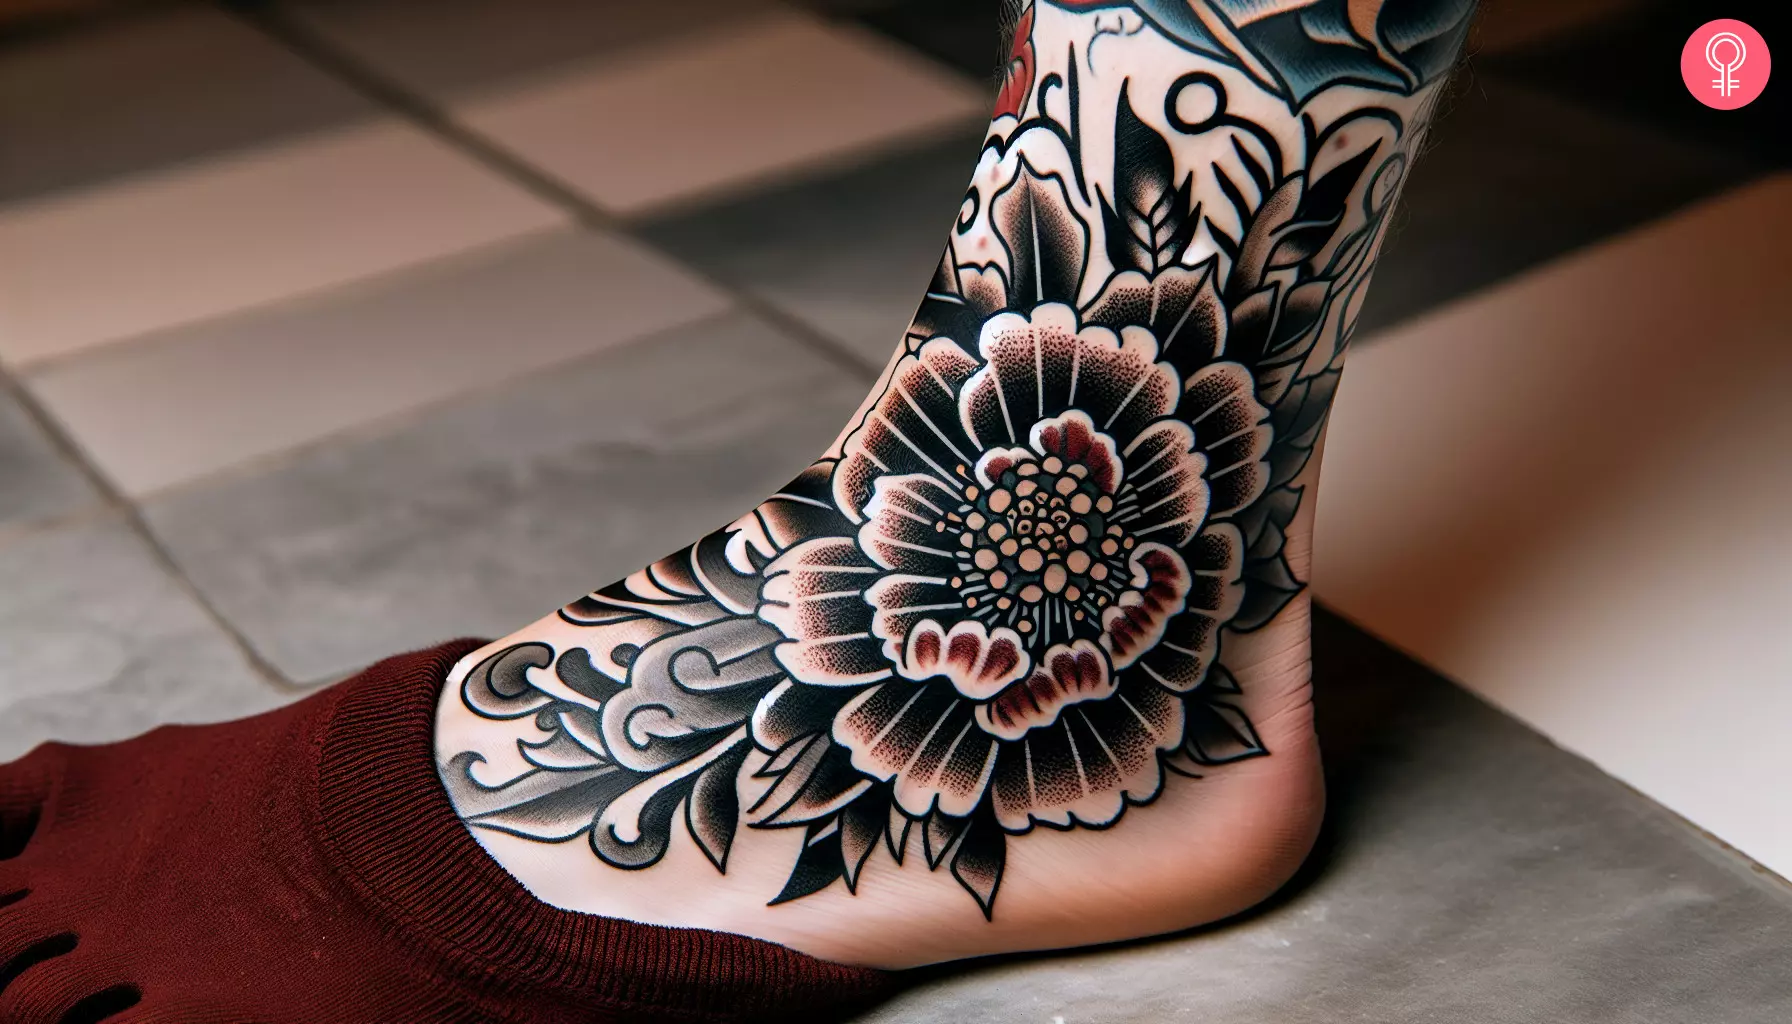 A traditional colored tattoo to cover up a tattoo